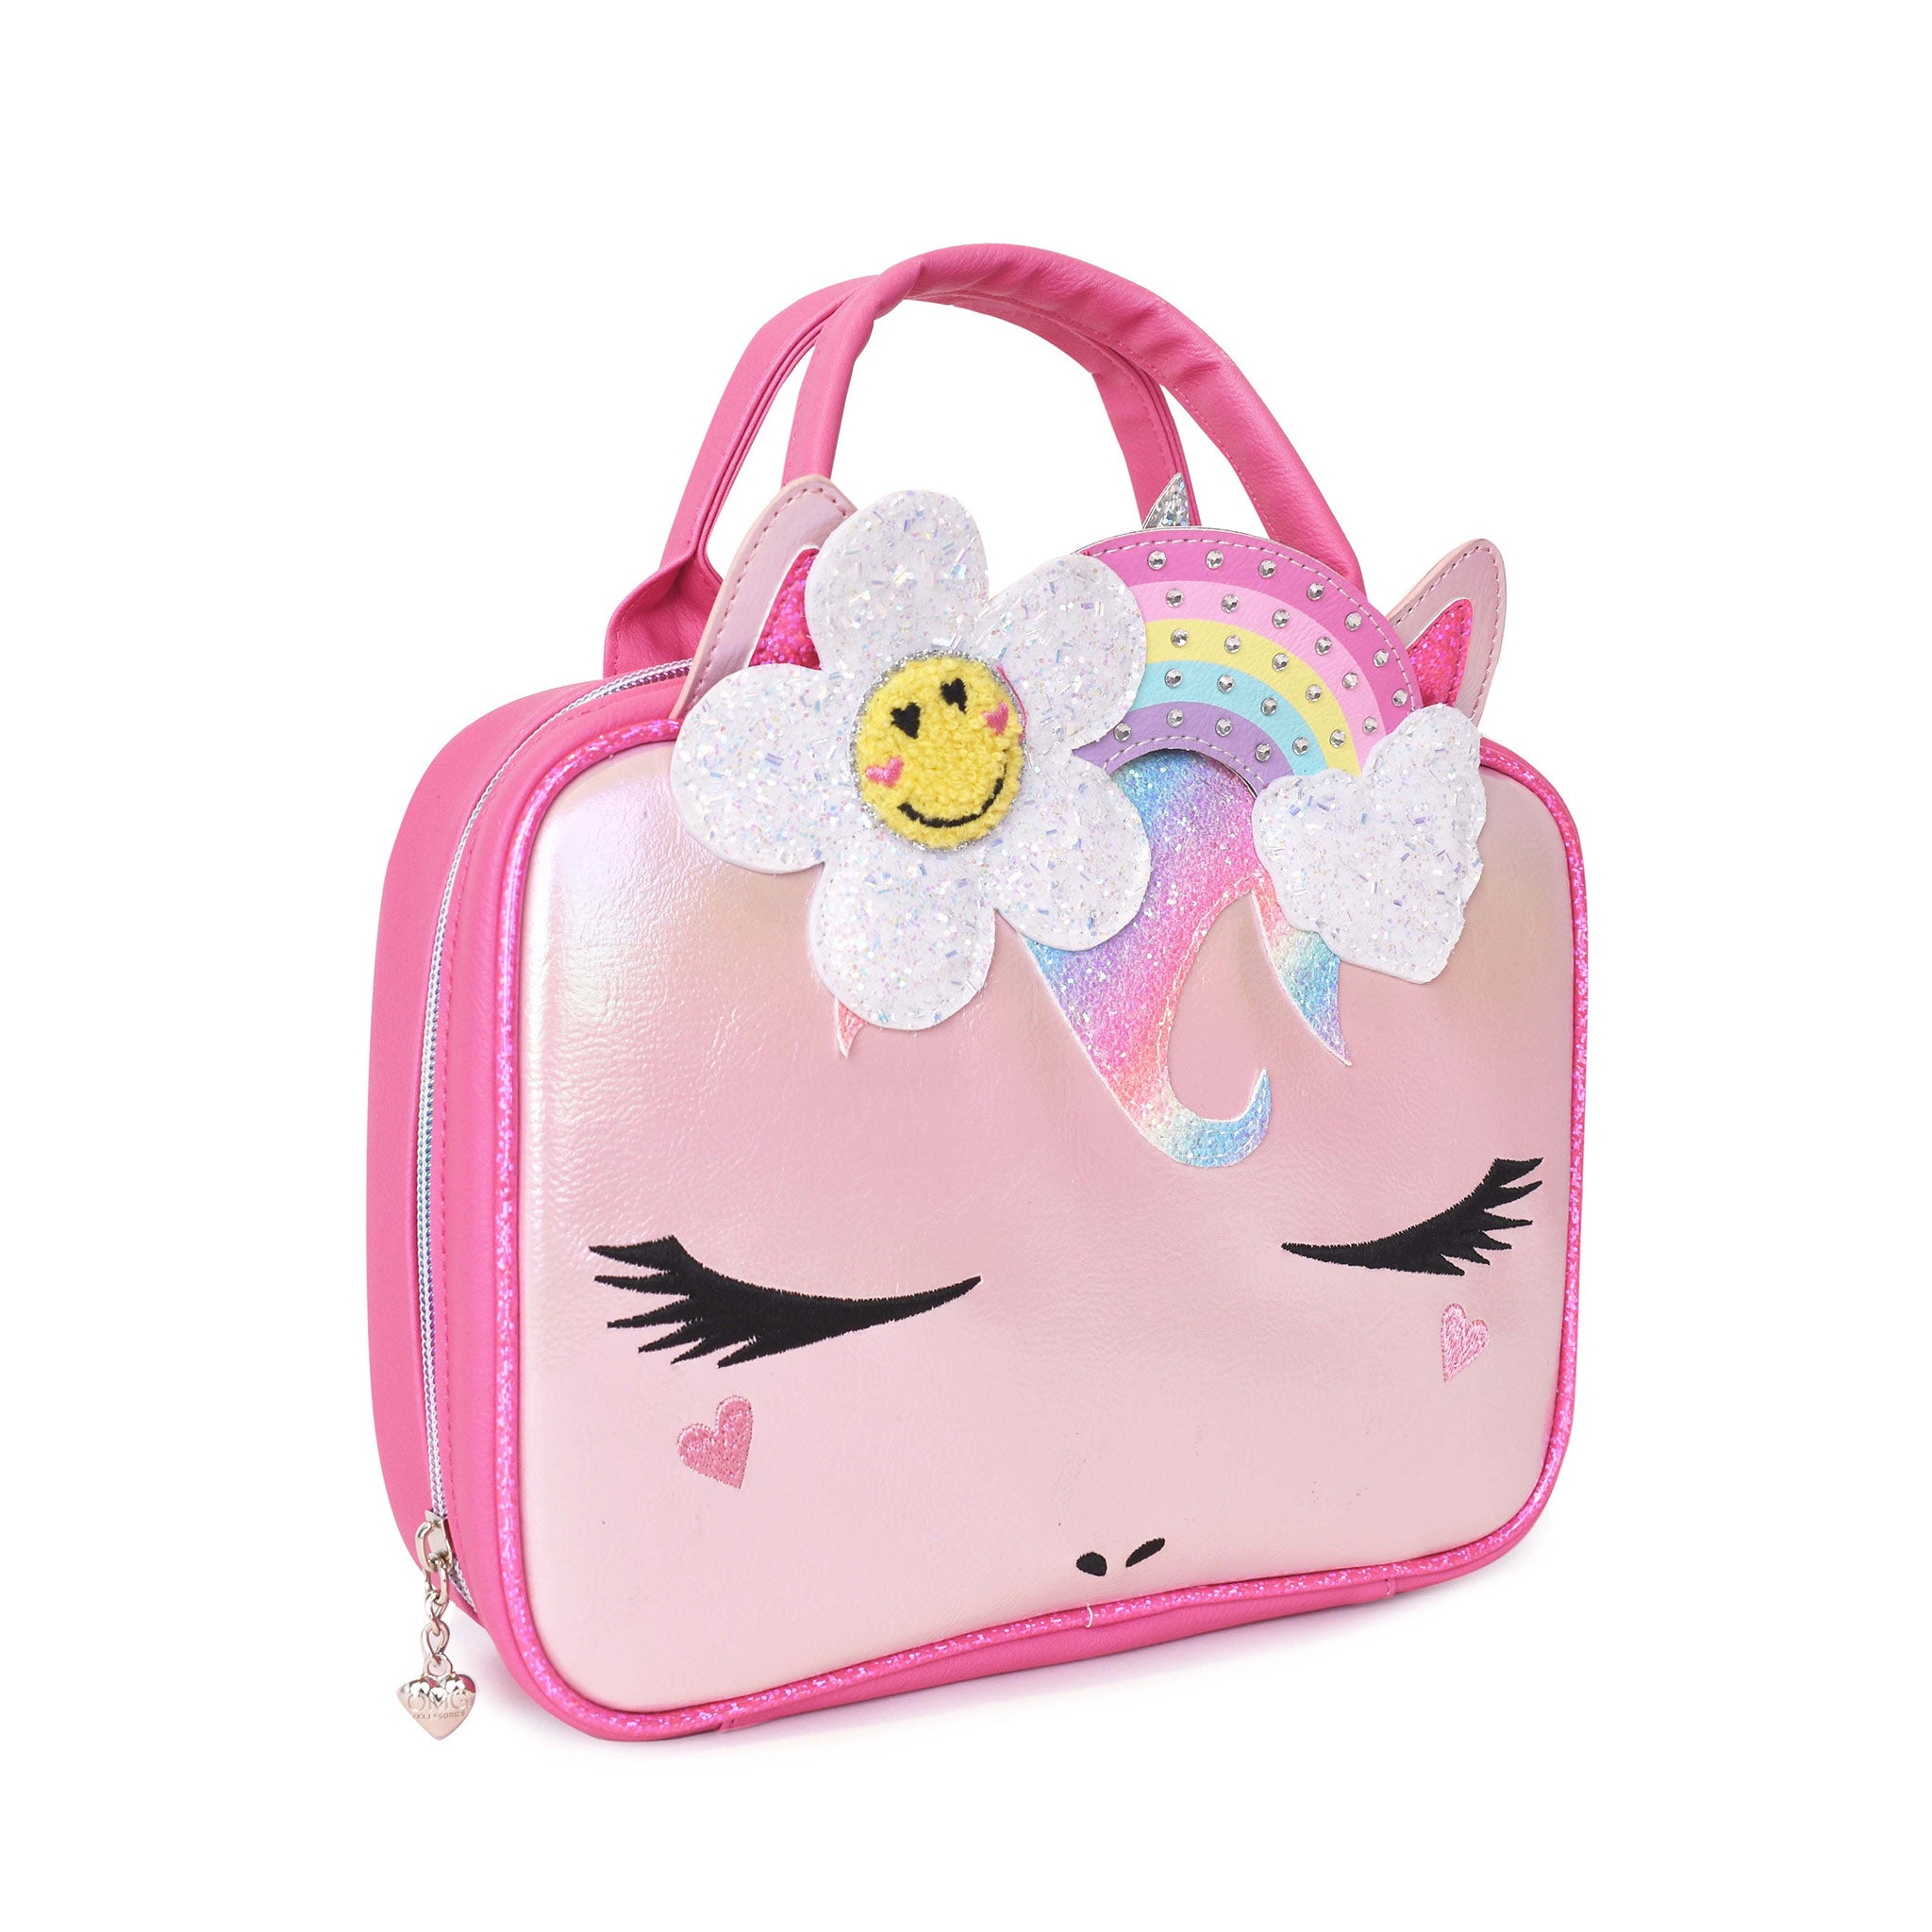 Side view of a unicorn face, pink metallic rectangular lunch bag with a daisy & rainbow crown applique